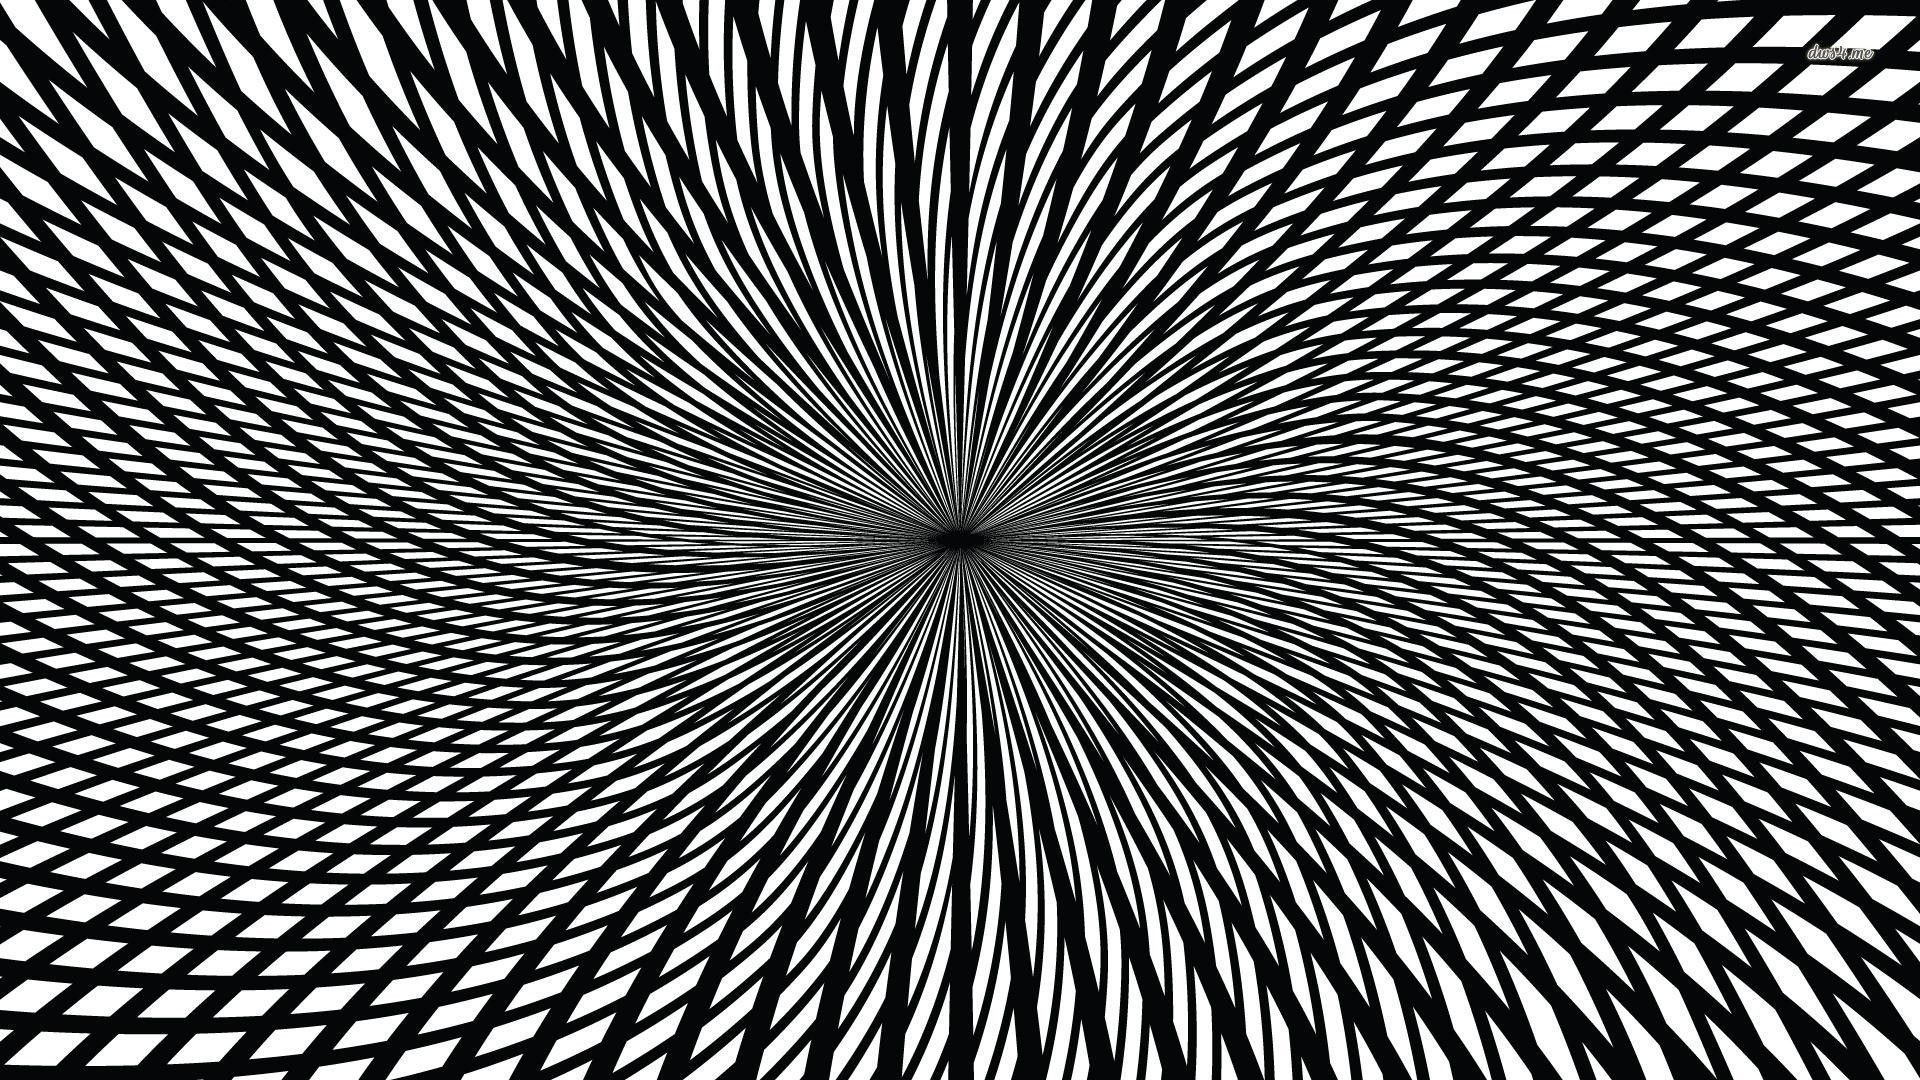 Free download Moving Optical Illusions Wallpaper Hd Free Android  Application [1920x1200] for your Desktop, Mobile & Tablet | Explore 26+  Moving Optical Illusions Wallpapers | Optical Illusions Backgrounds, Illusions  Wallpapers, Optical Illusions Wallpaper